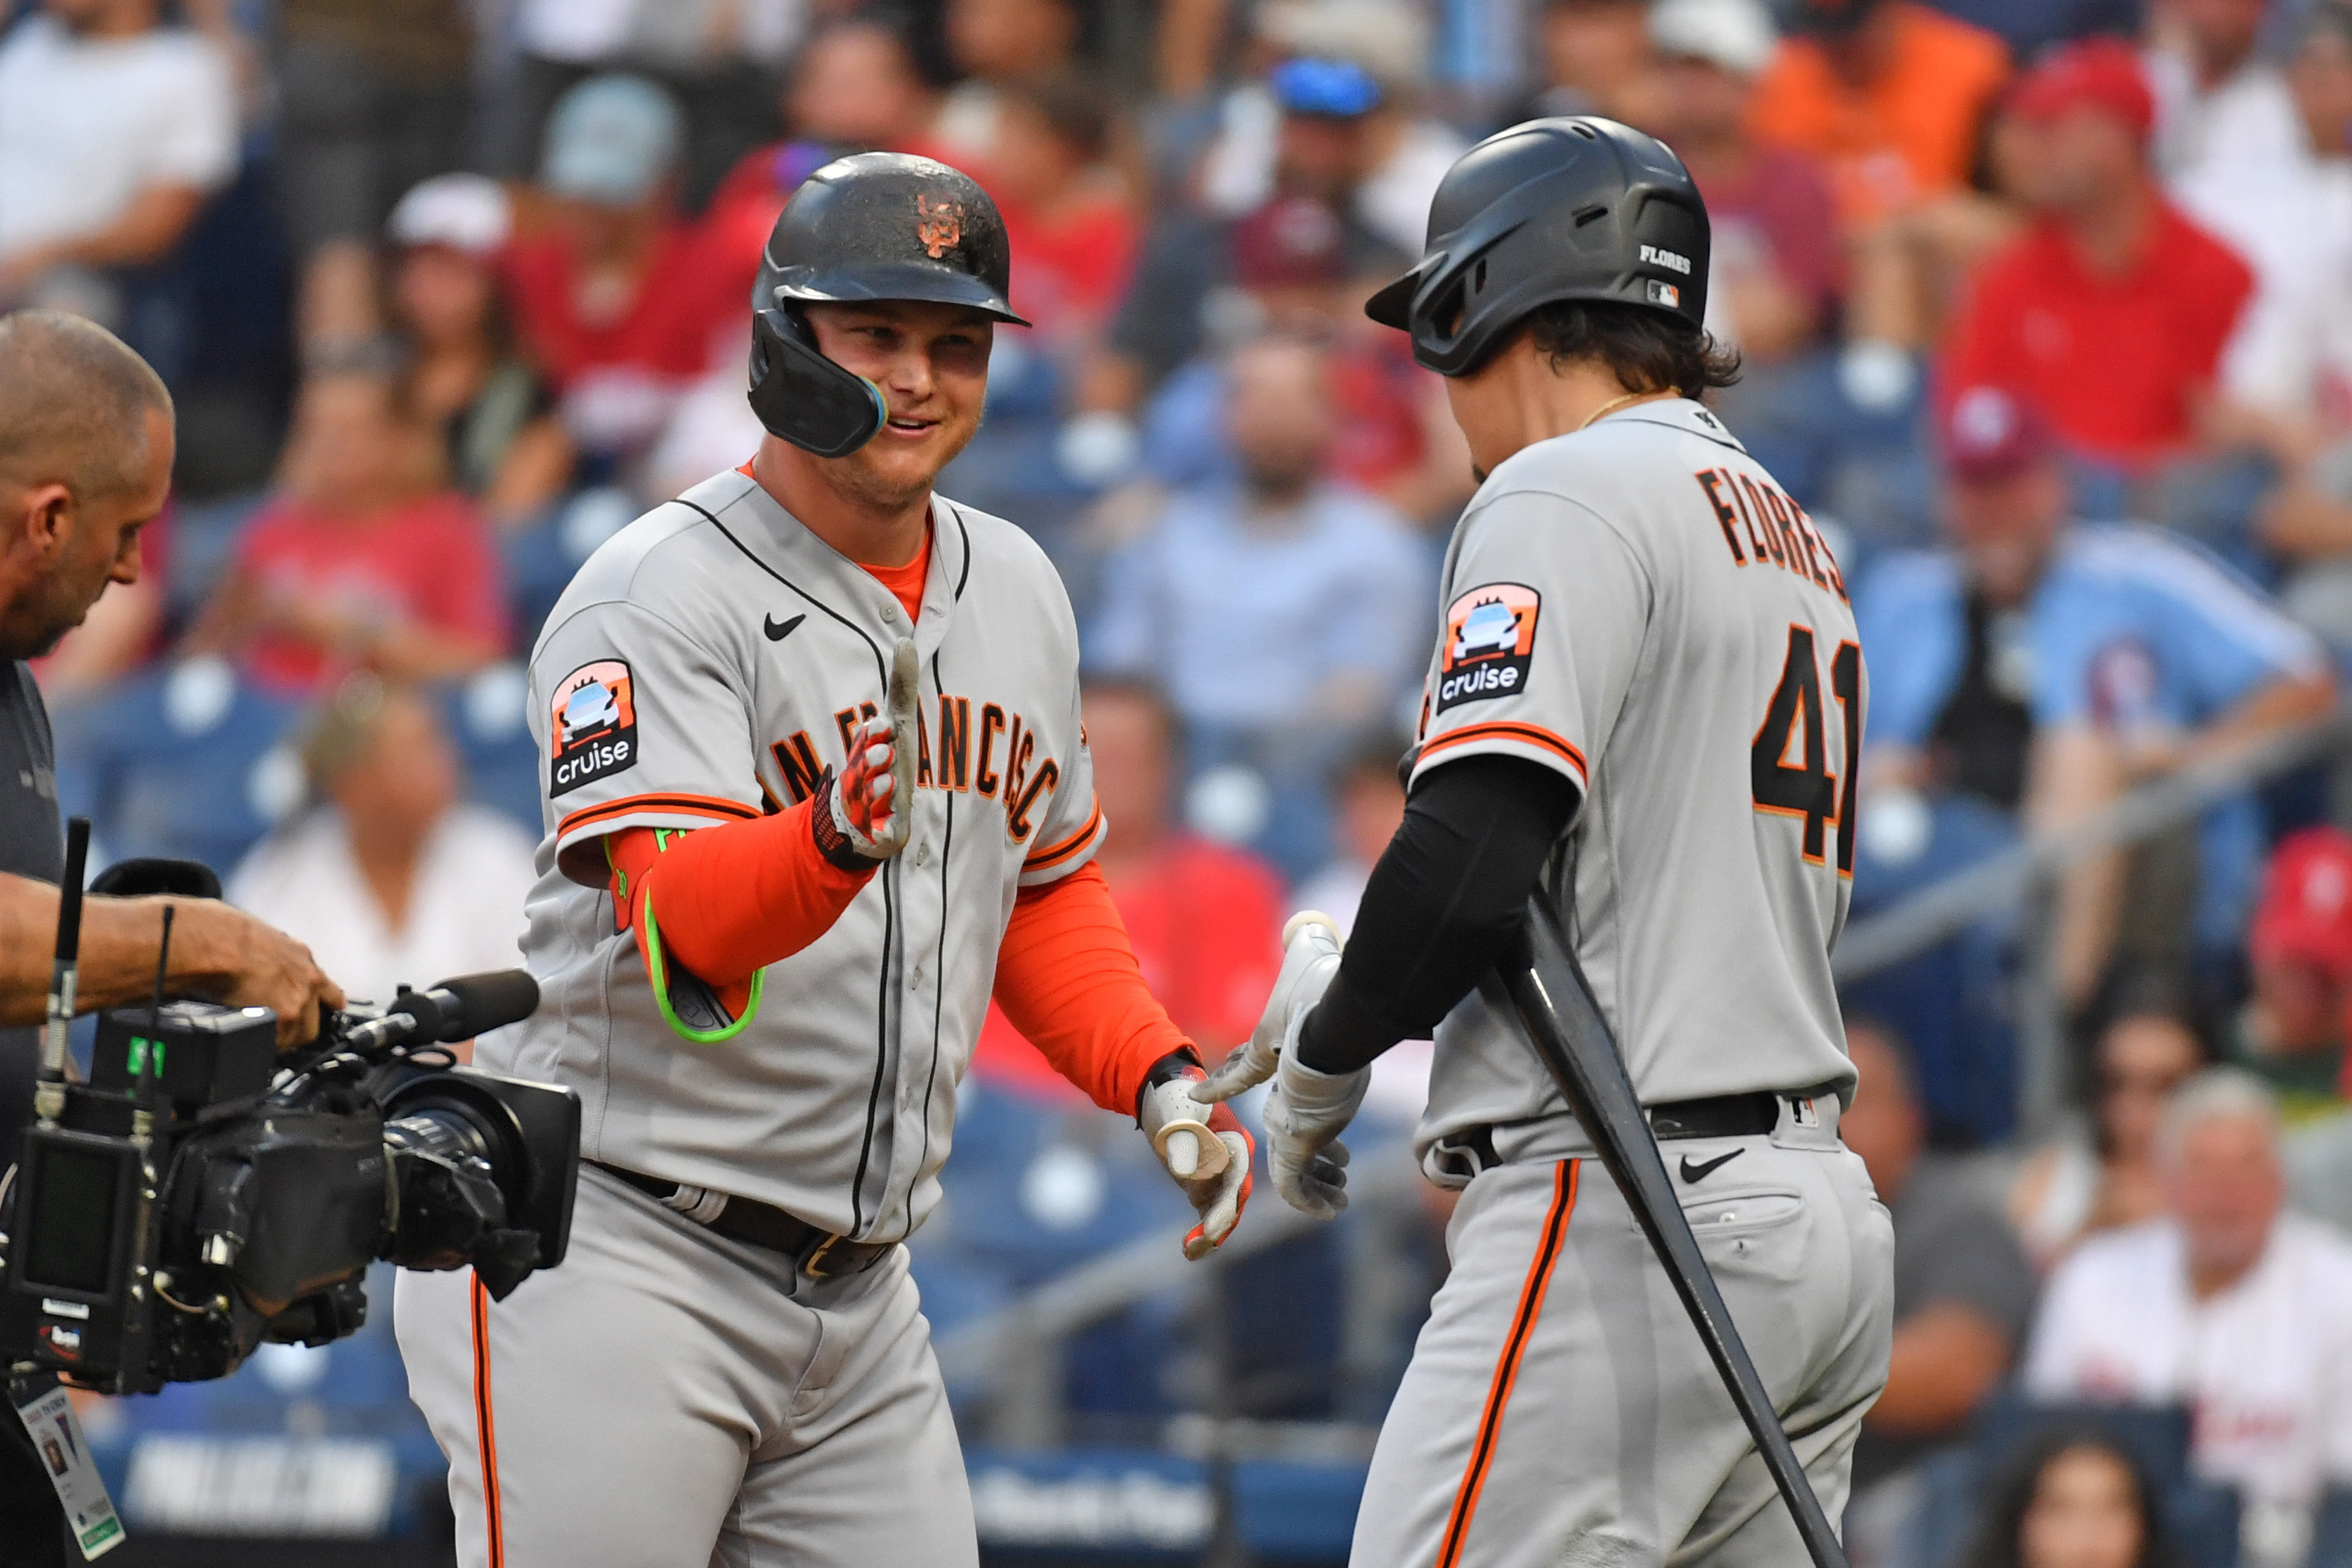 Flores homers to help Giants to win over Astros